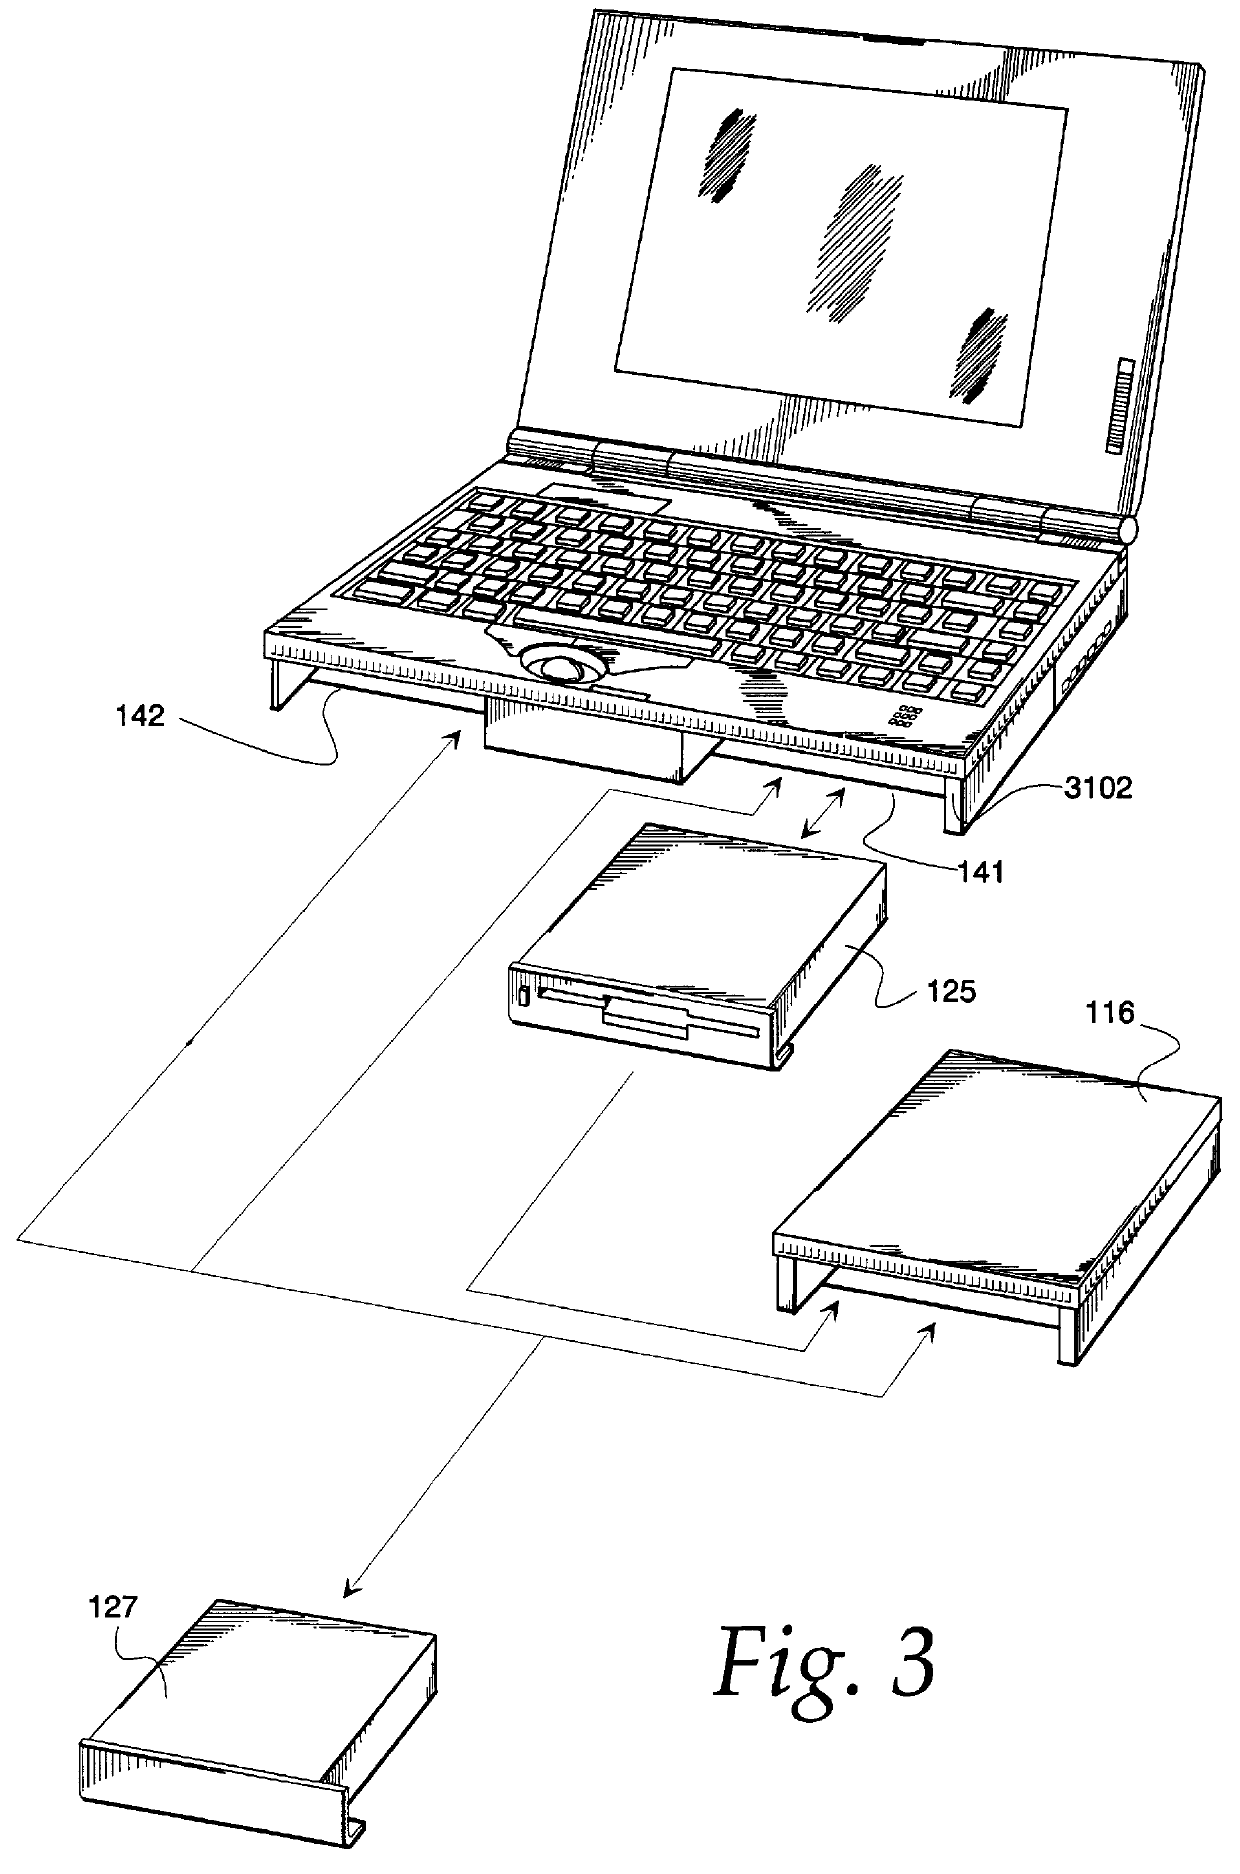 Modular portable personal computer having bays to receive interchangeable modules